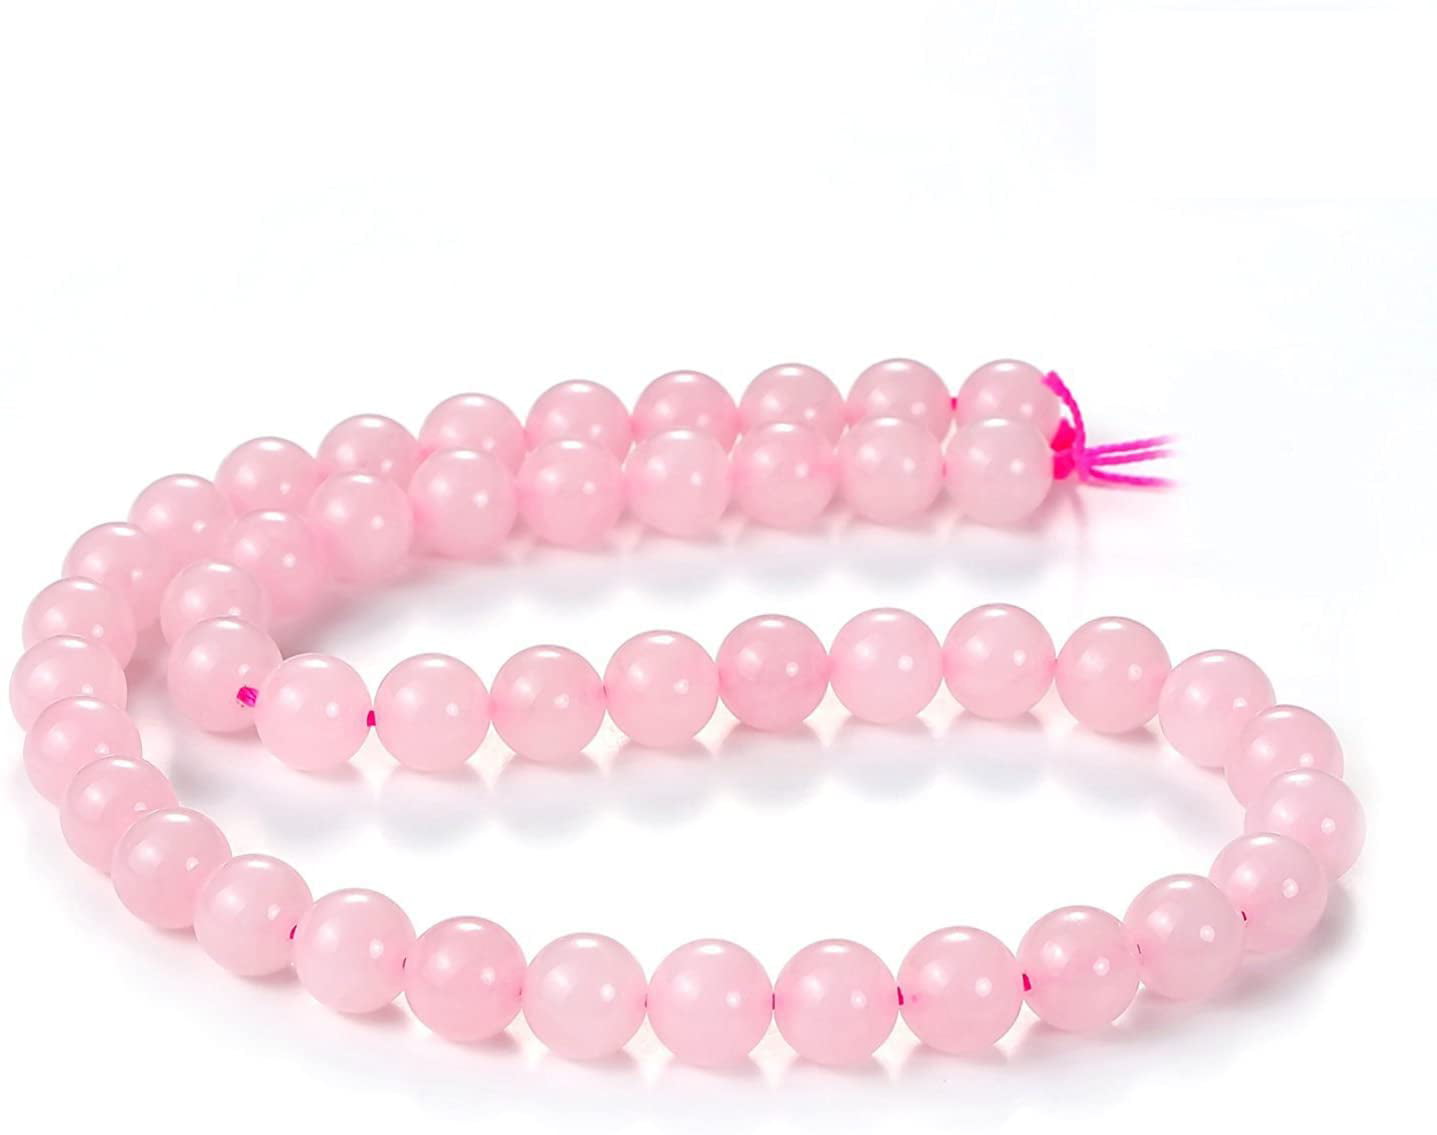 Natural Rose Quartz Gemstone Faceted Round Loose Beads for Jewelry Making 15" 